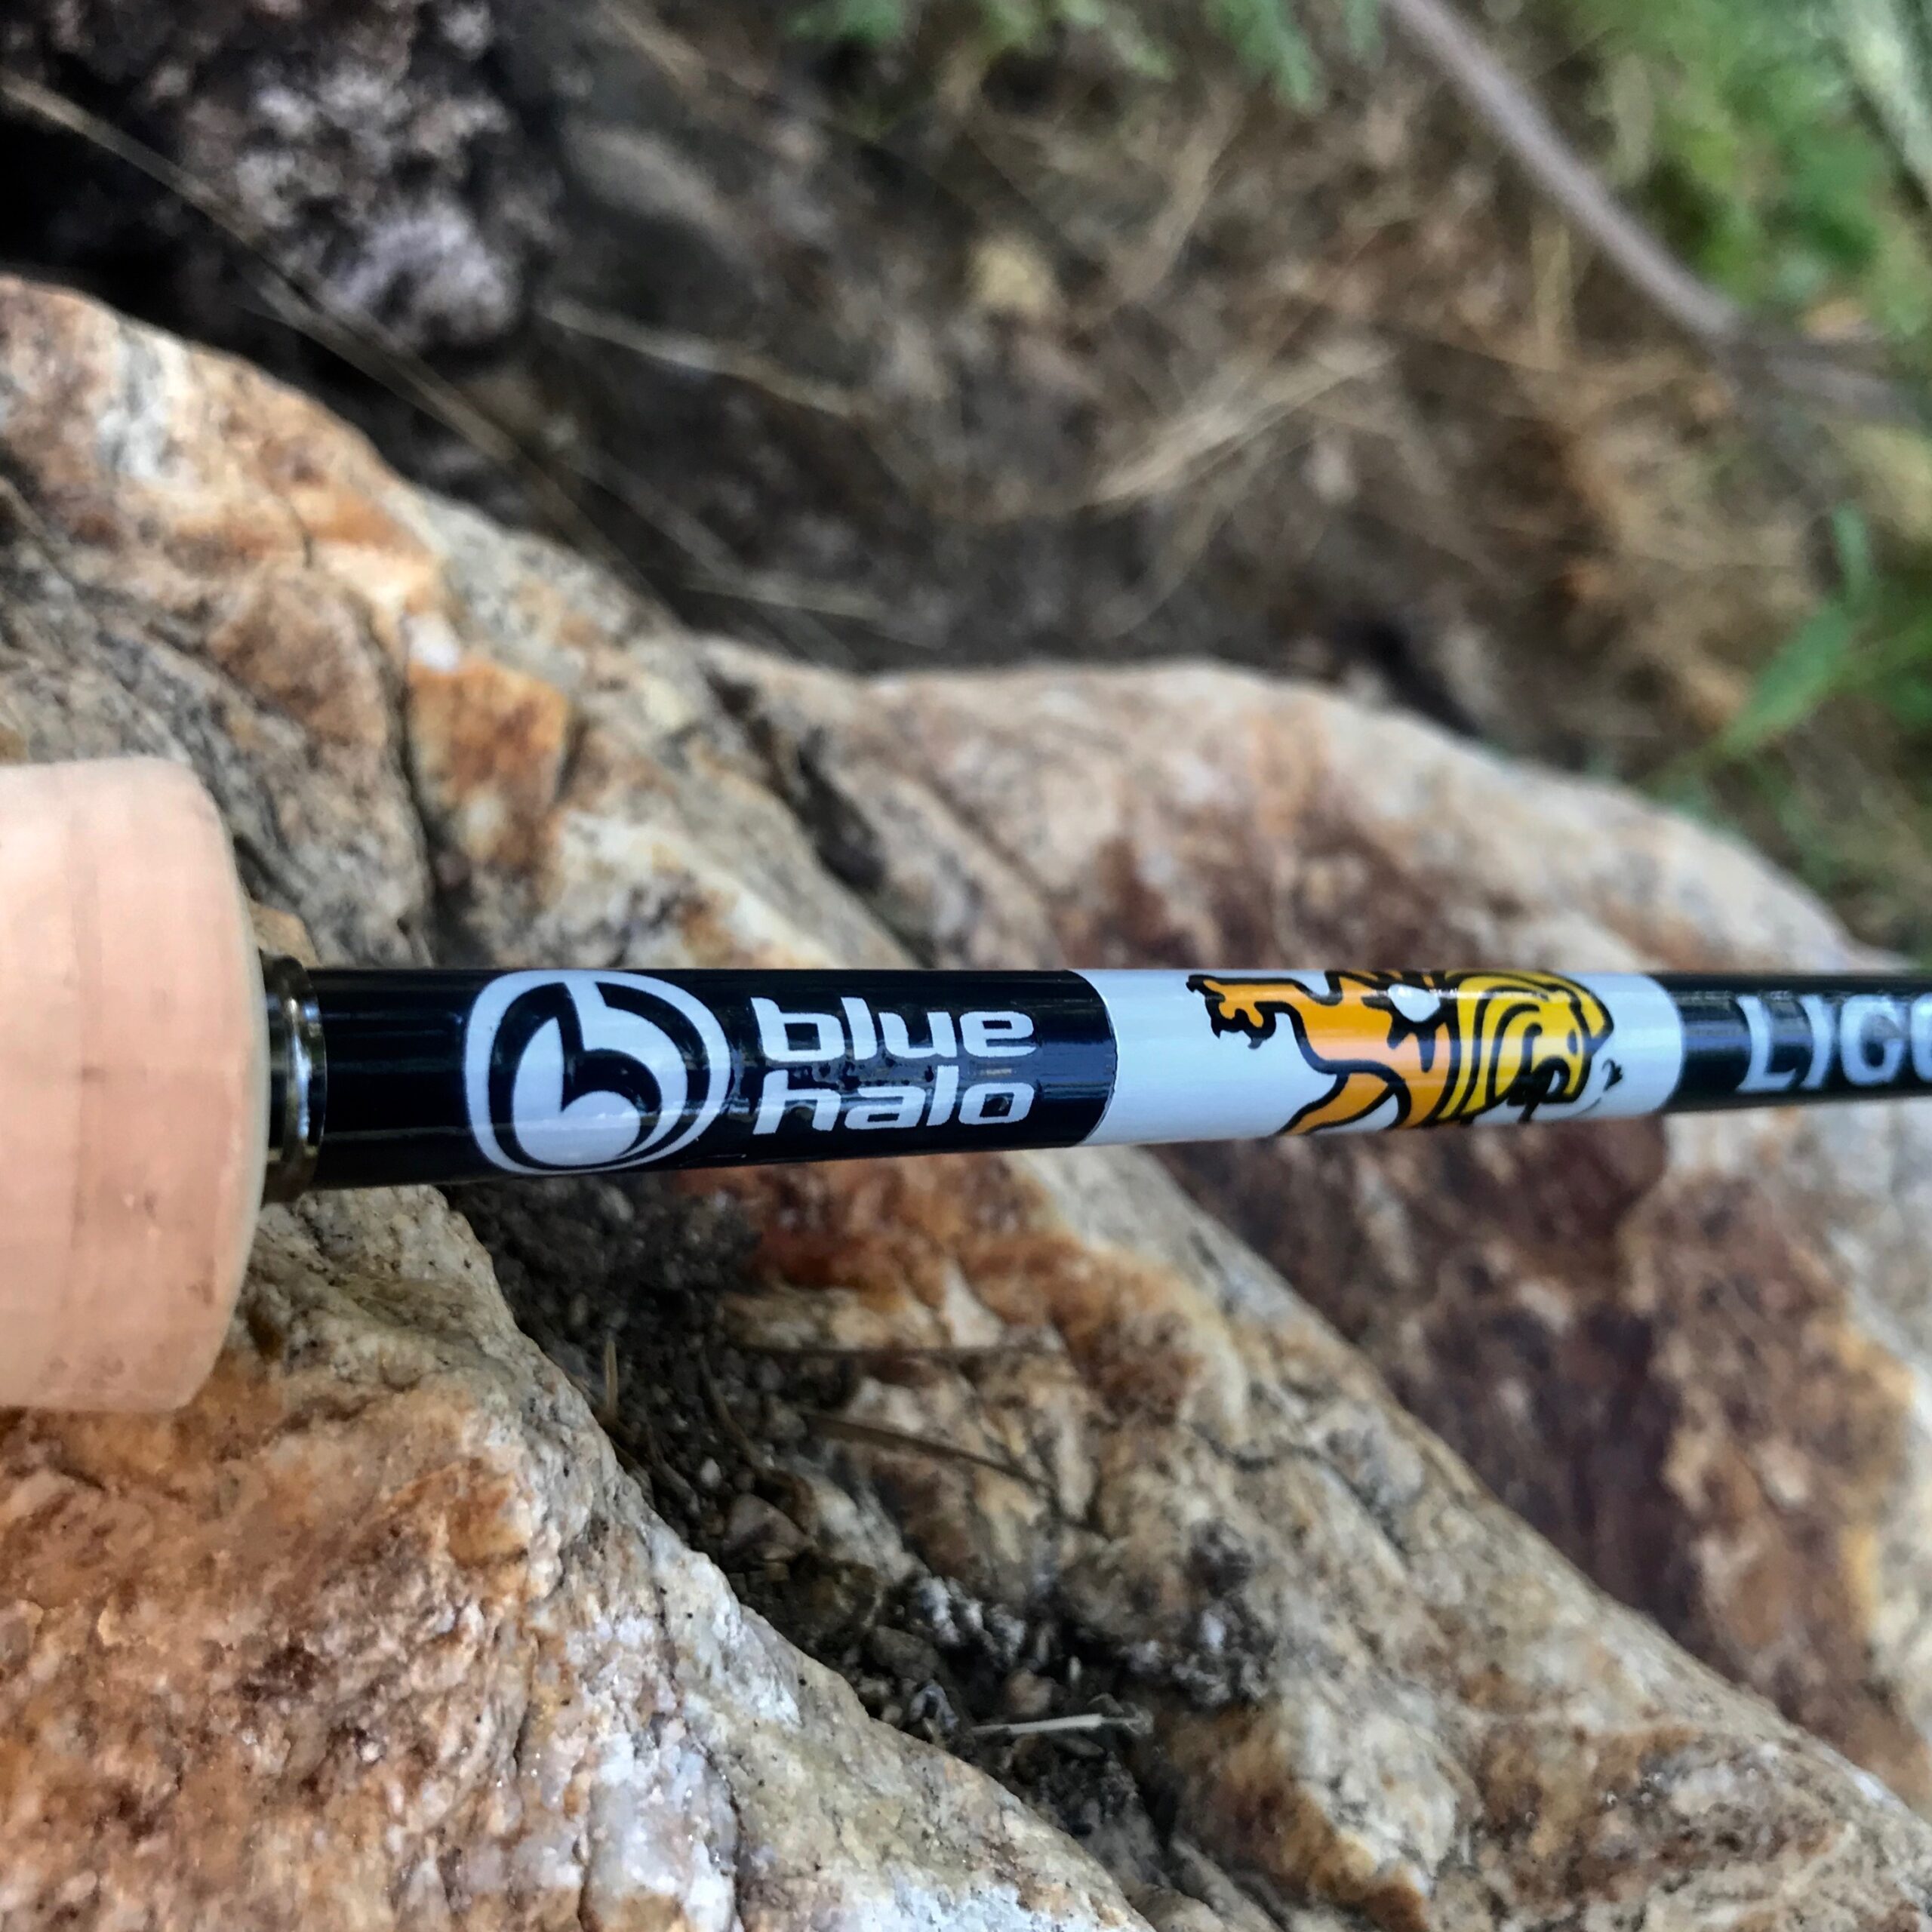 Blue Halo Liger (Hybrid) - Wasatch Fly Fishing